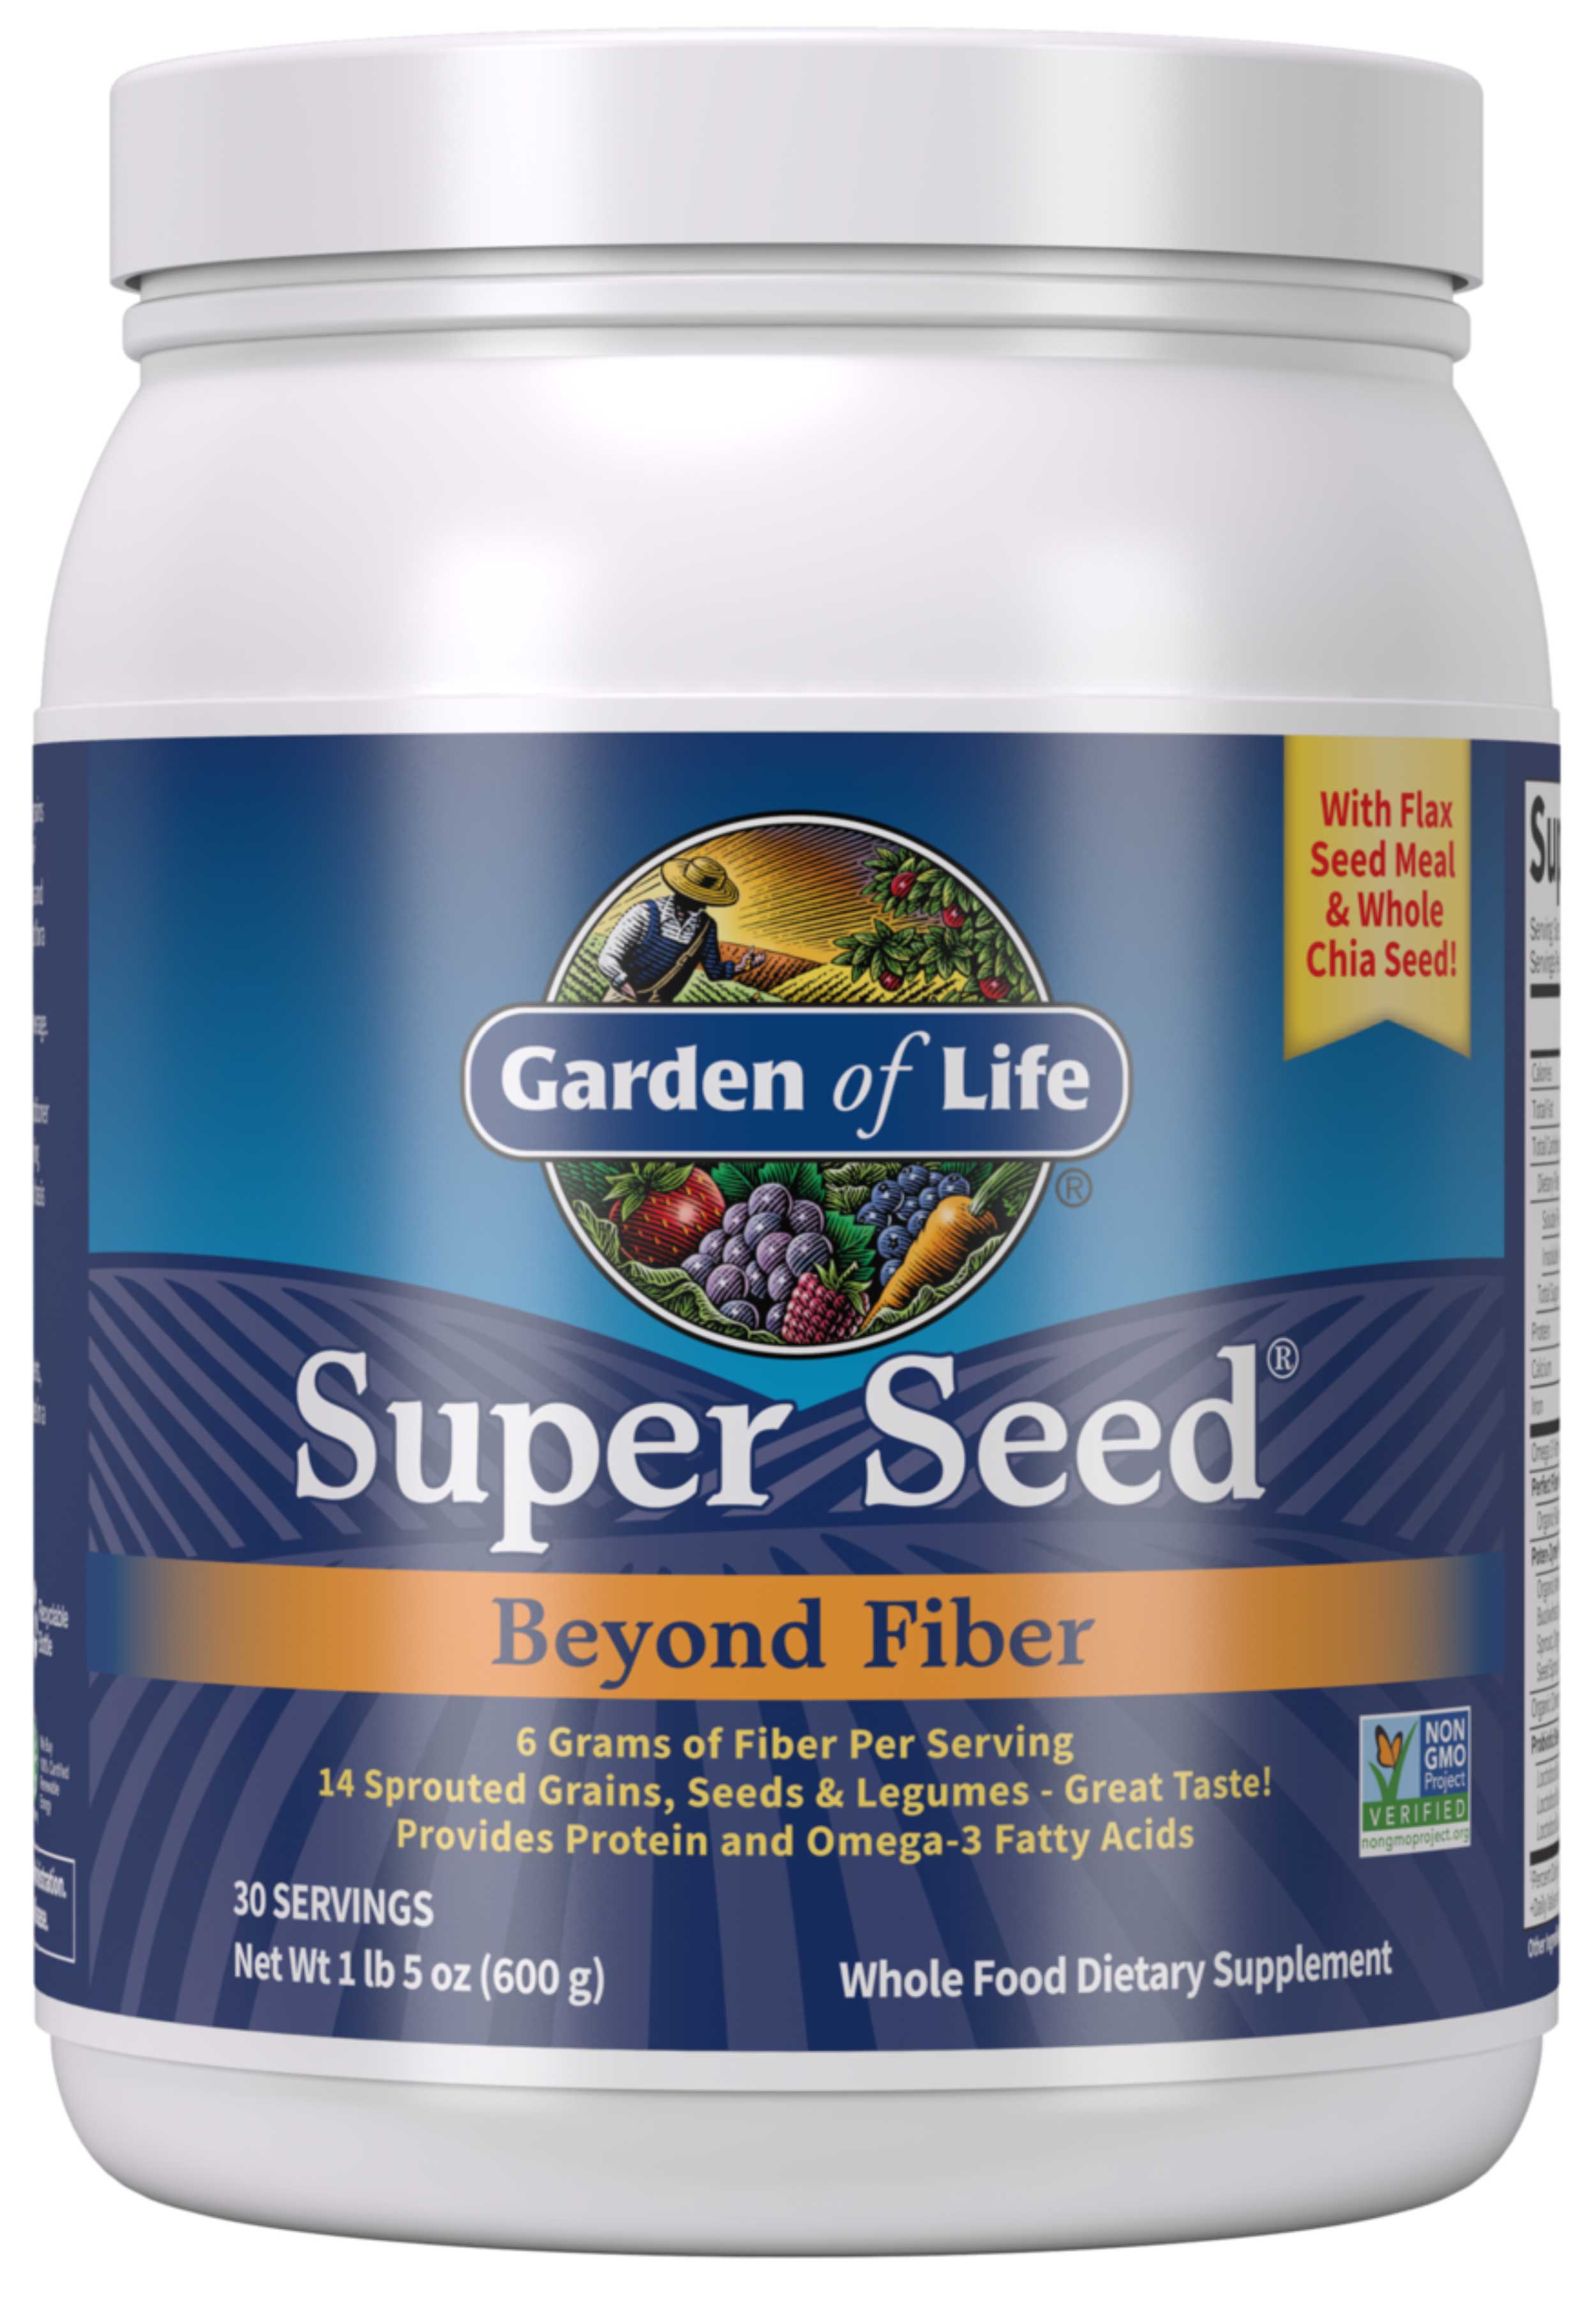 Garden of Life Super Seed